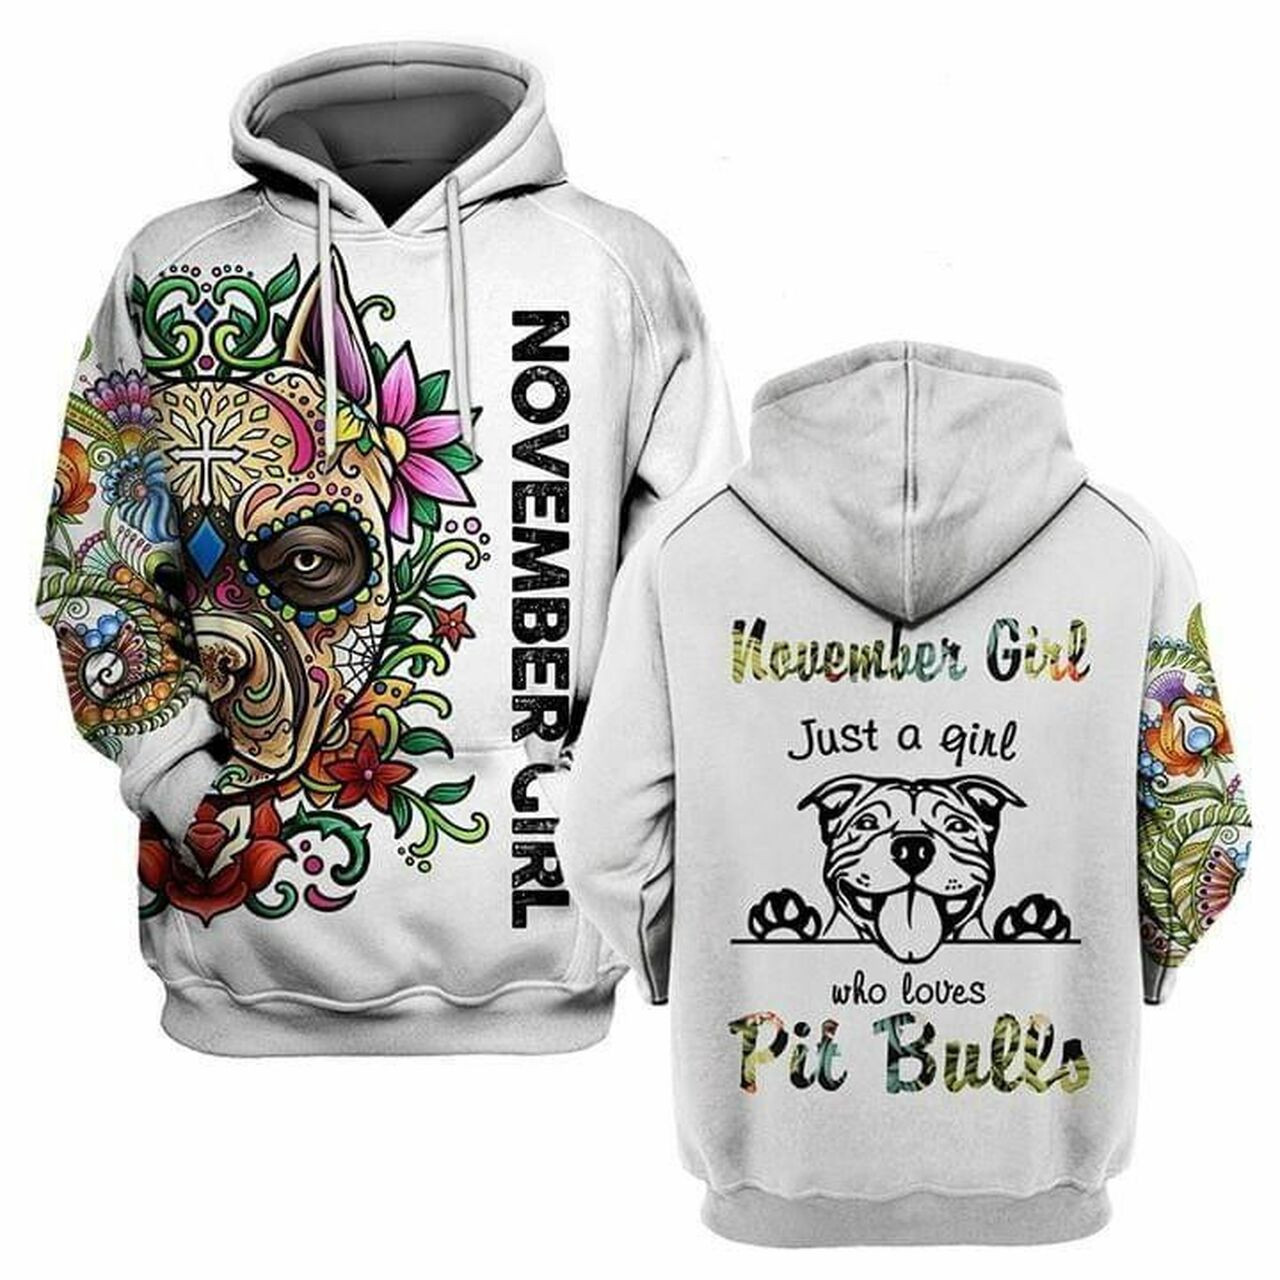 November Girl Just A Girl Who Loves Pitbulls Pullover And Zip Pered Hoodies Custom 3d Graphic